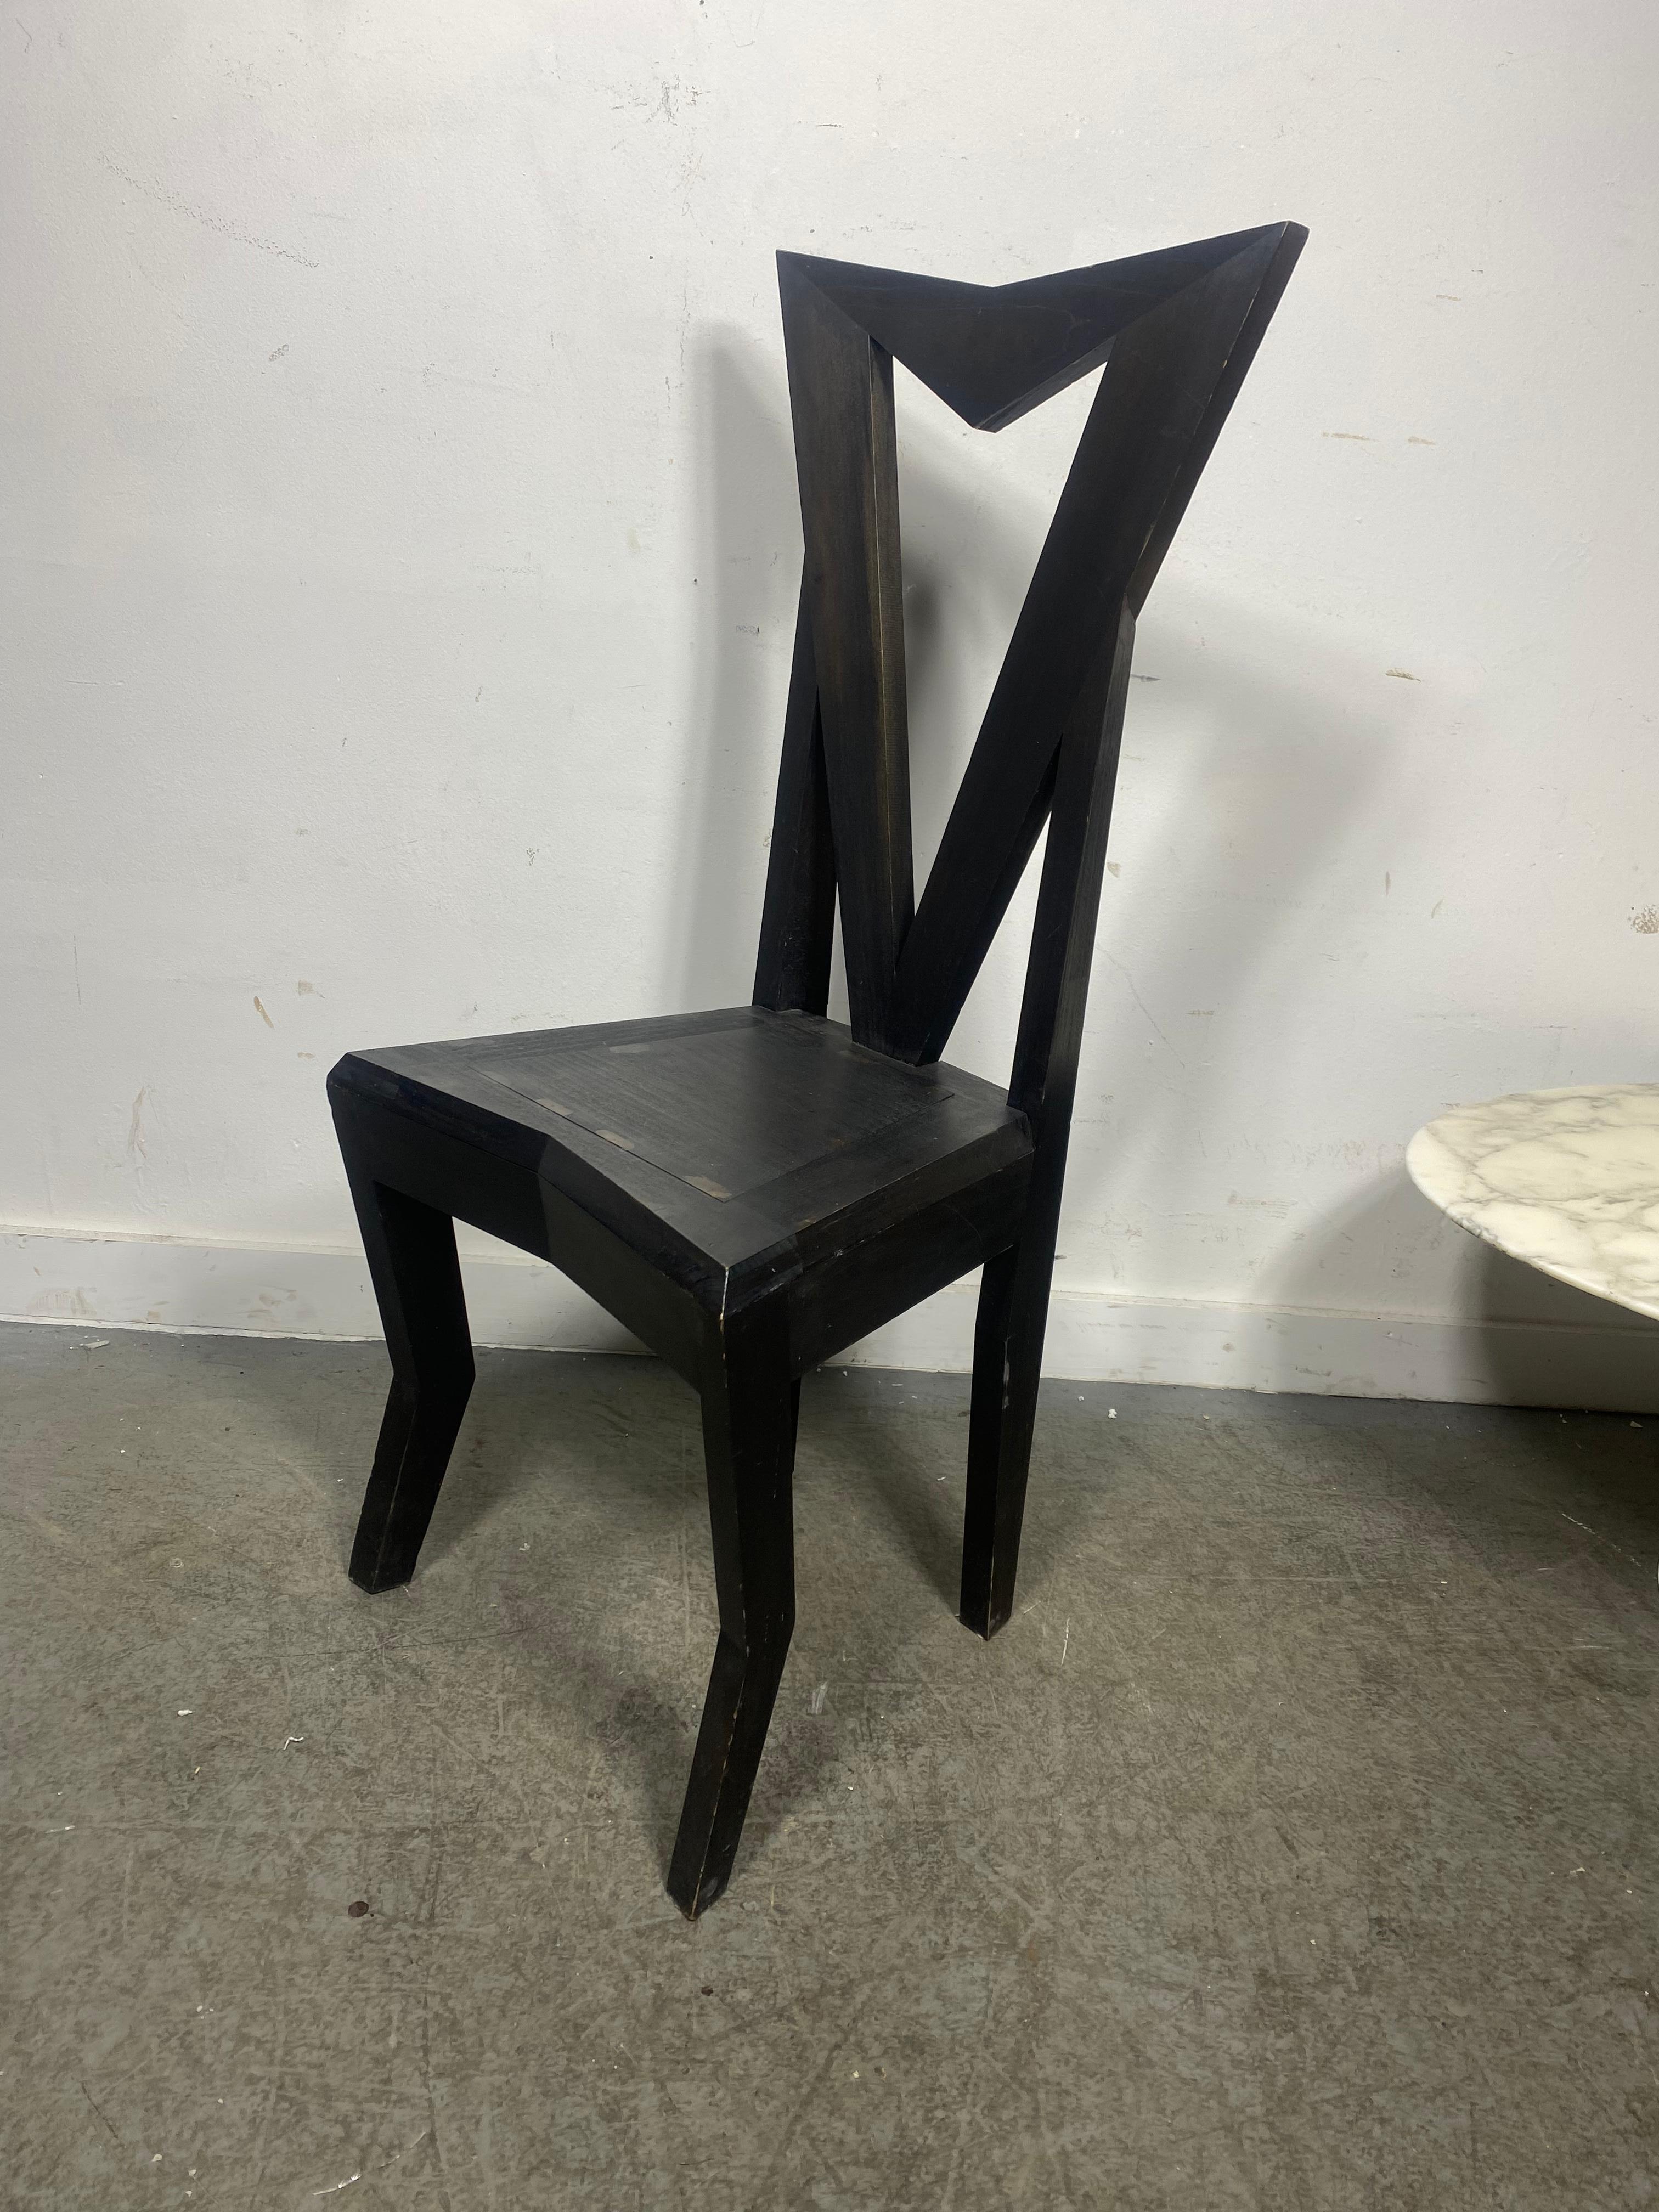 The expressive forms of this Janák's Cubist chair secured it a place among the most distinctive and most frequently published pieces of early Czech Cubist furniture. This beautiful and expressive chair is also very comfortable to sit on. The